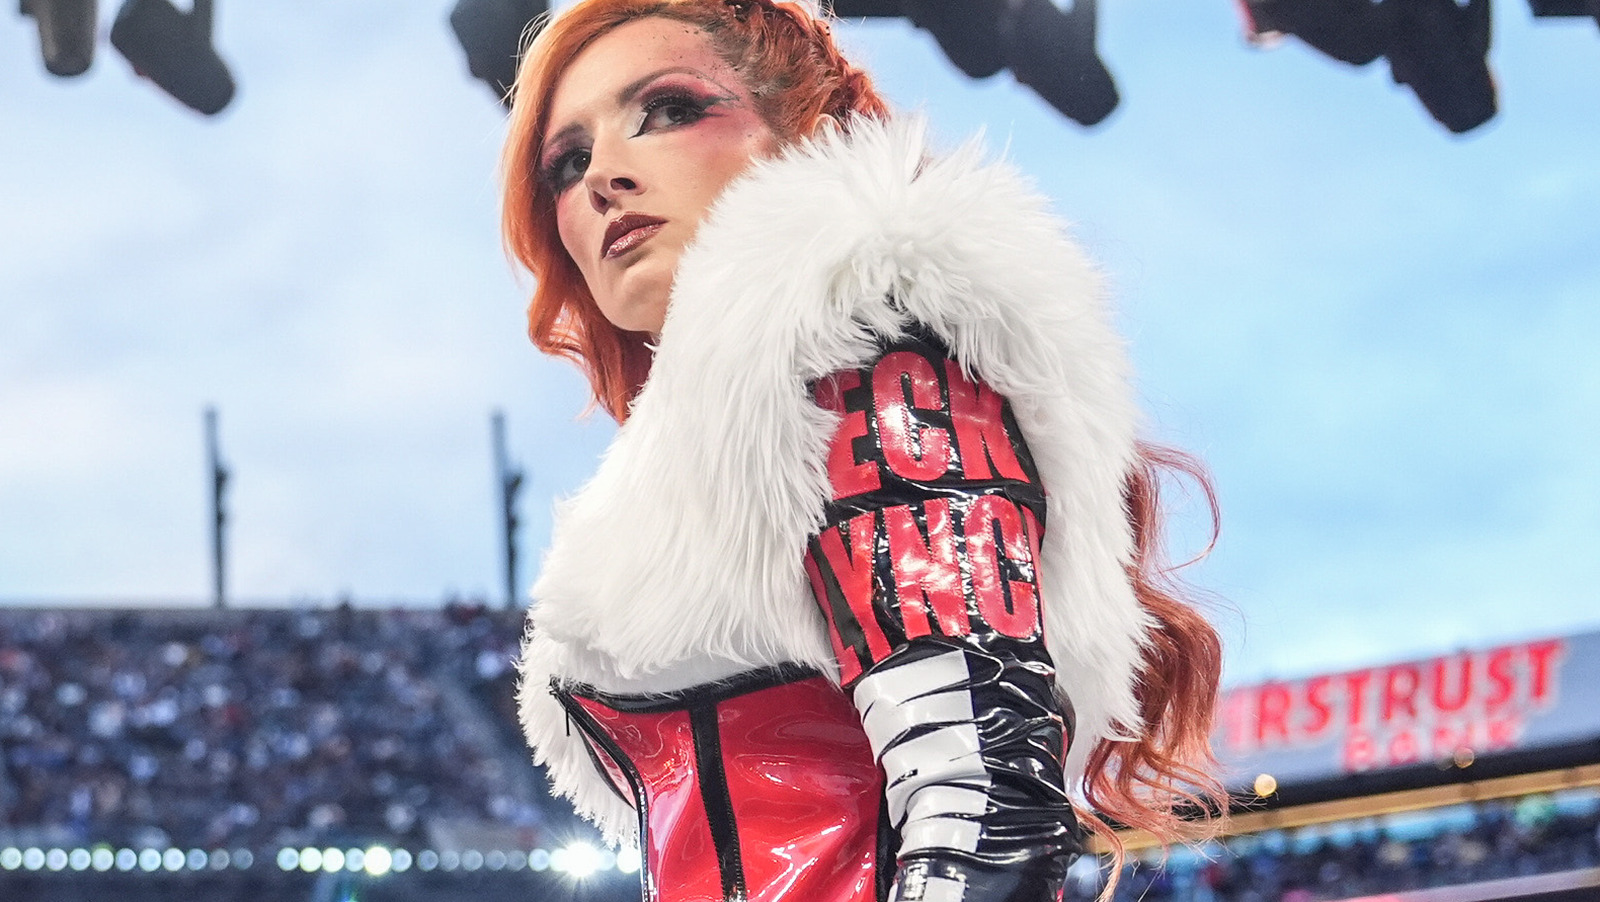 Report: Becky Lynch's WWE Contract Weeks Away From Expiration With No New Deal Signed